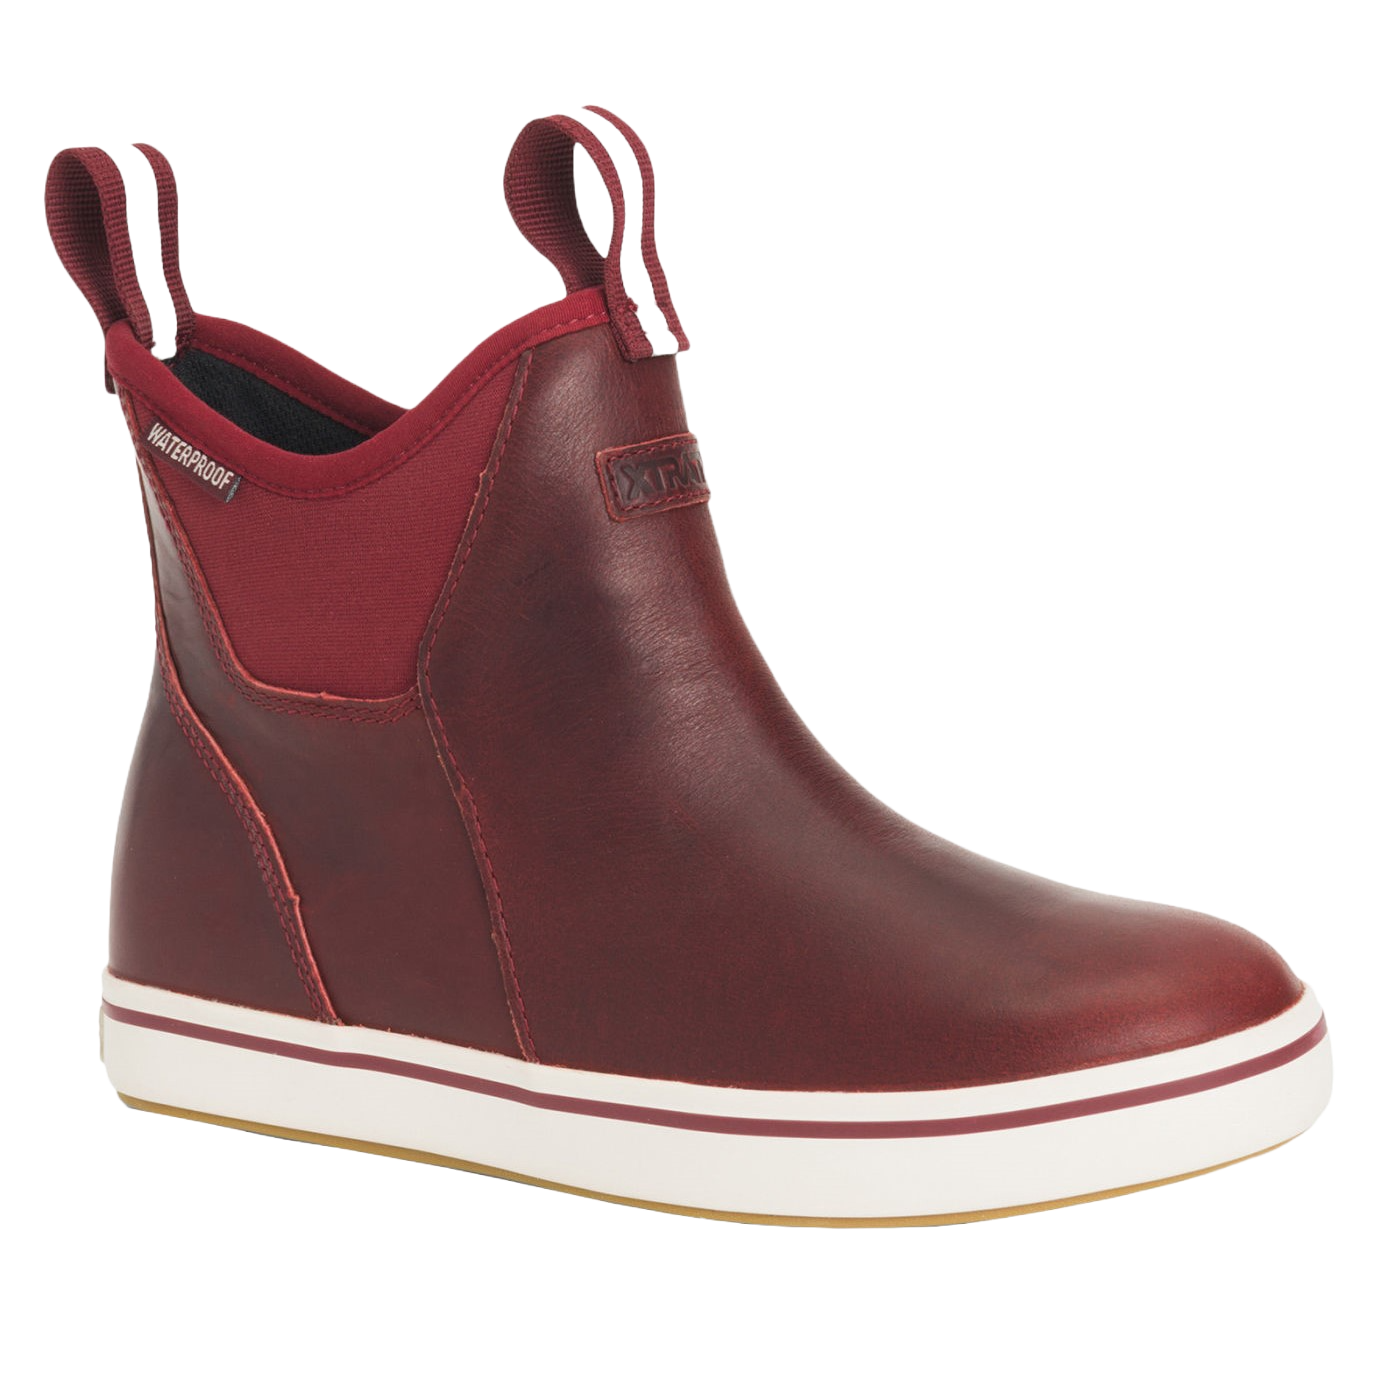 XTRATUF Ladies 6 inch Red Leather Ankle Deck Boot XWAL-600